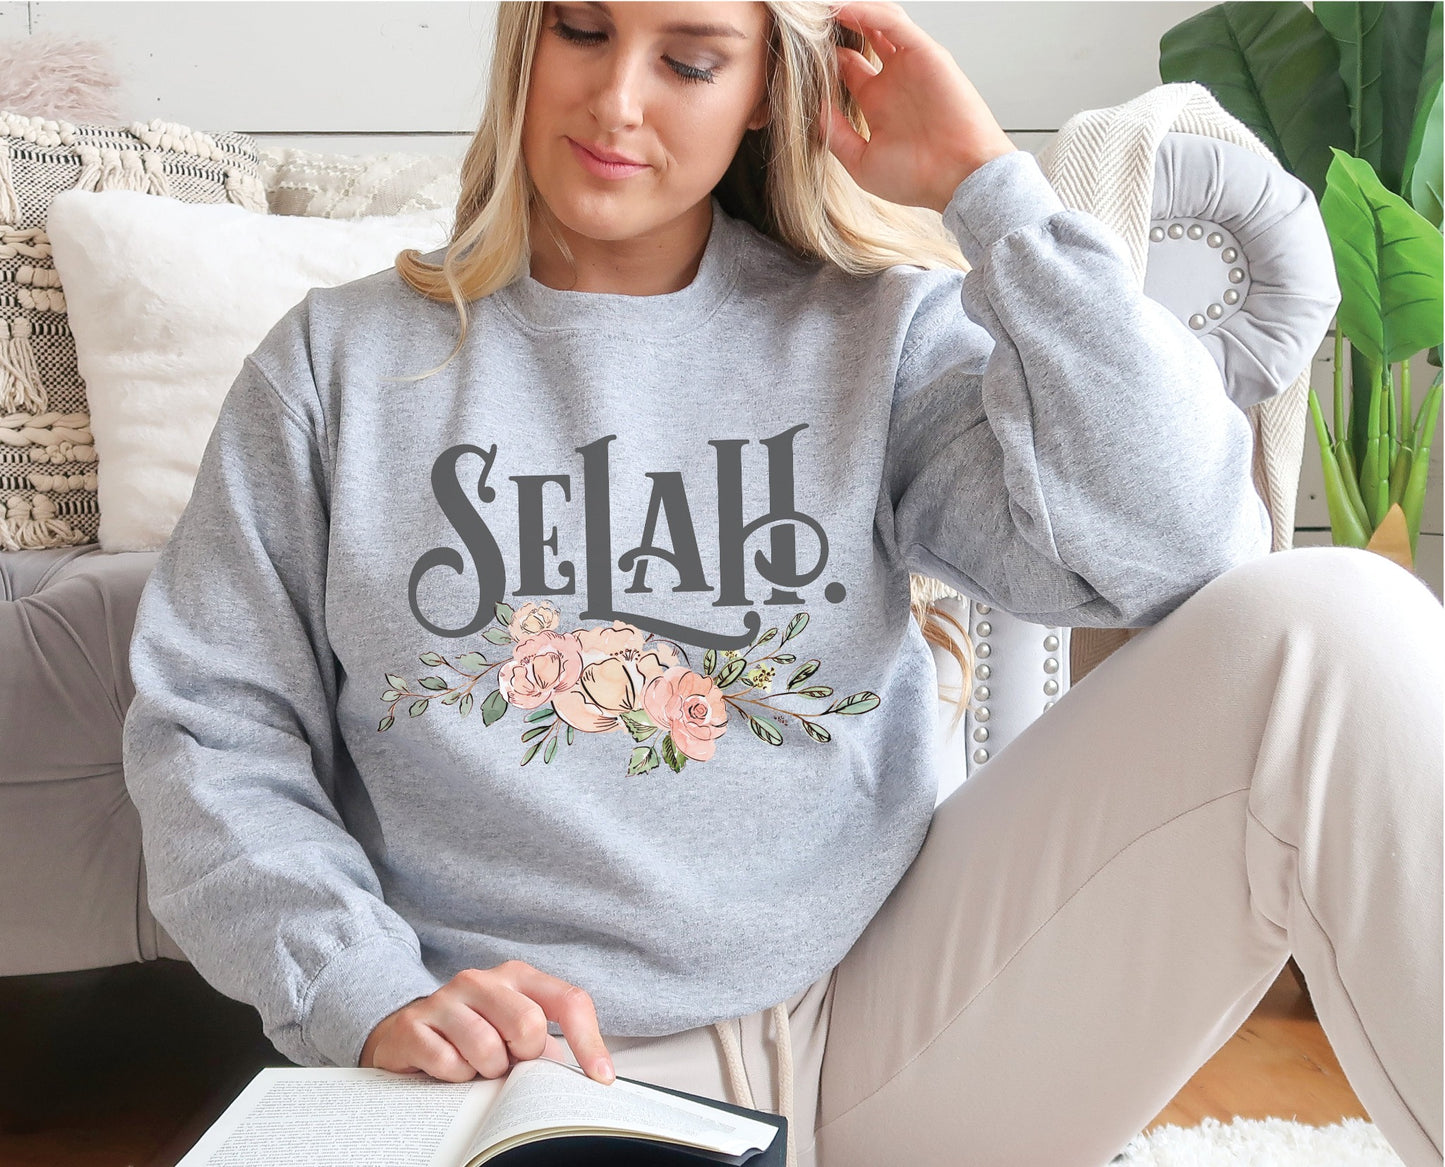 Selah Psalm watercolor floral Christian aesthetic design printed in charcoal gray, peach, blush pink, on cozy heather gray unisex crewneck sweatshirt for women